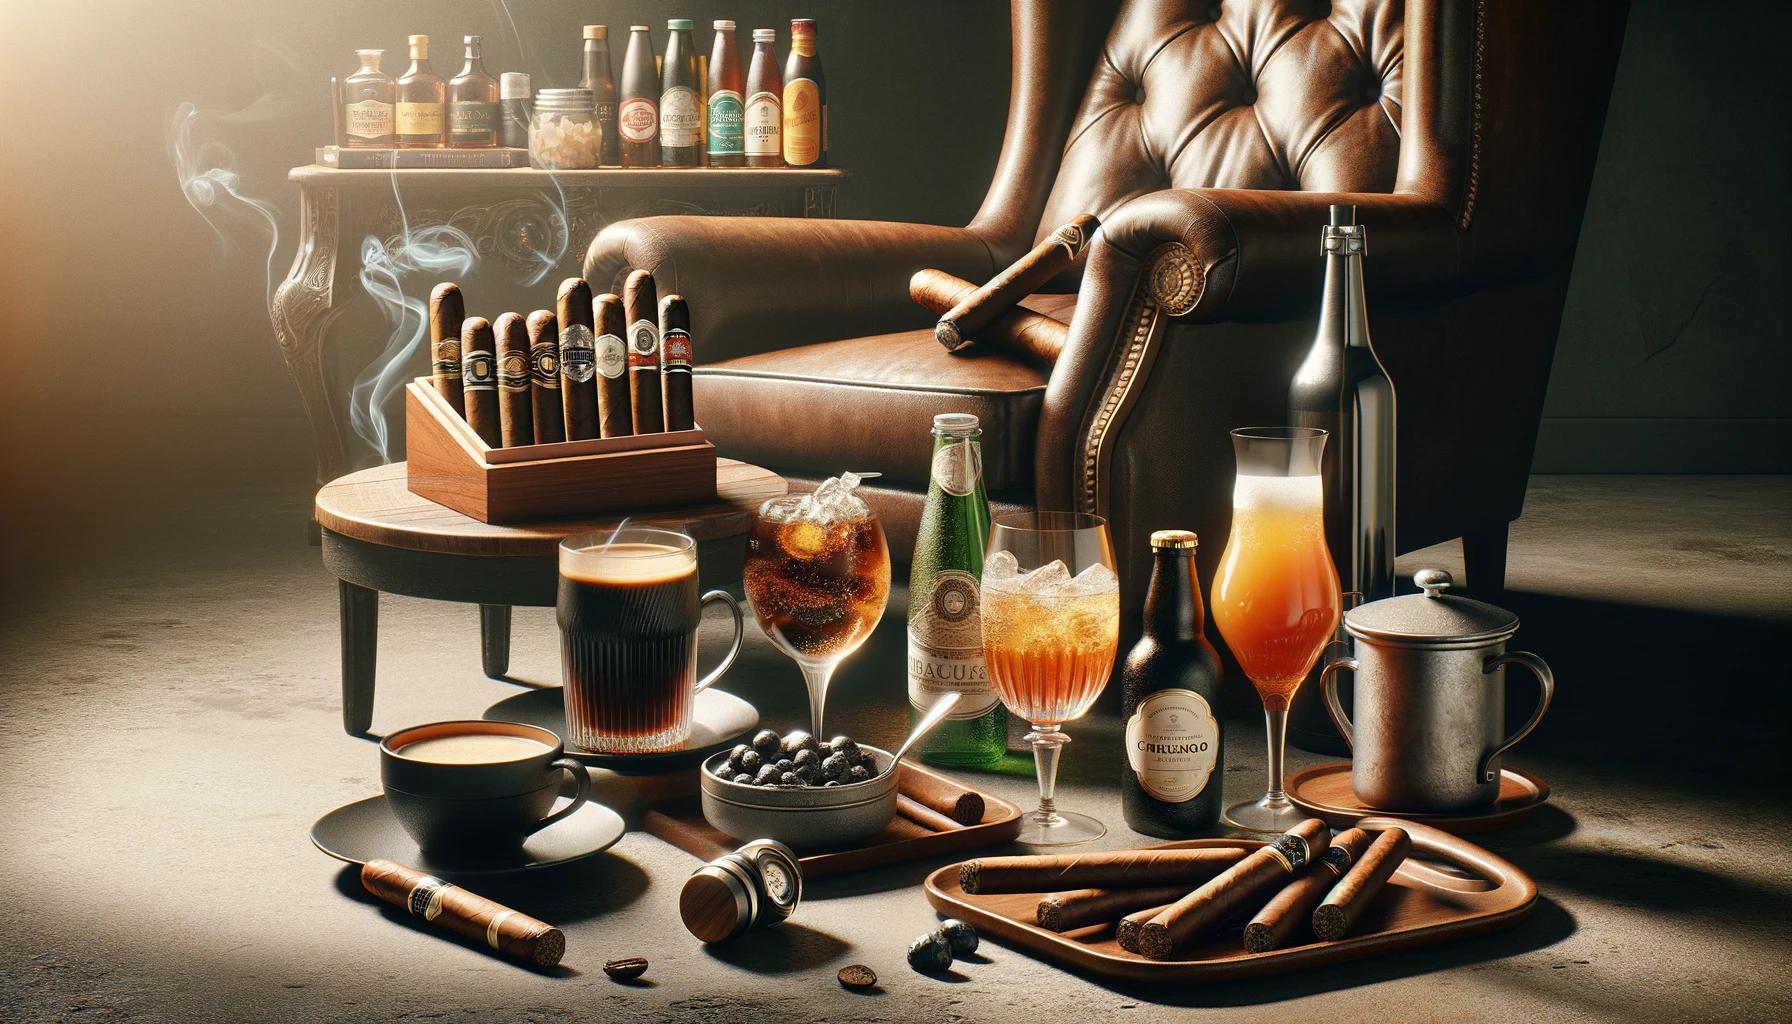 What Non-Alcoholic Drinks Go Well with Cigars